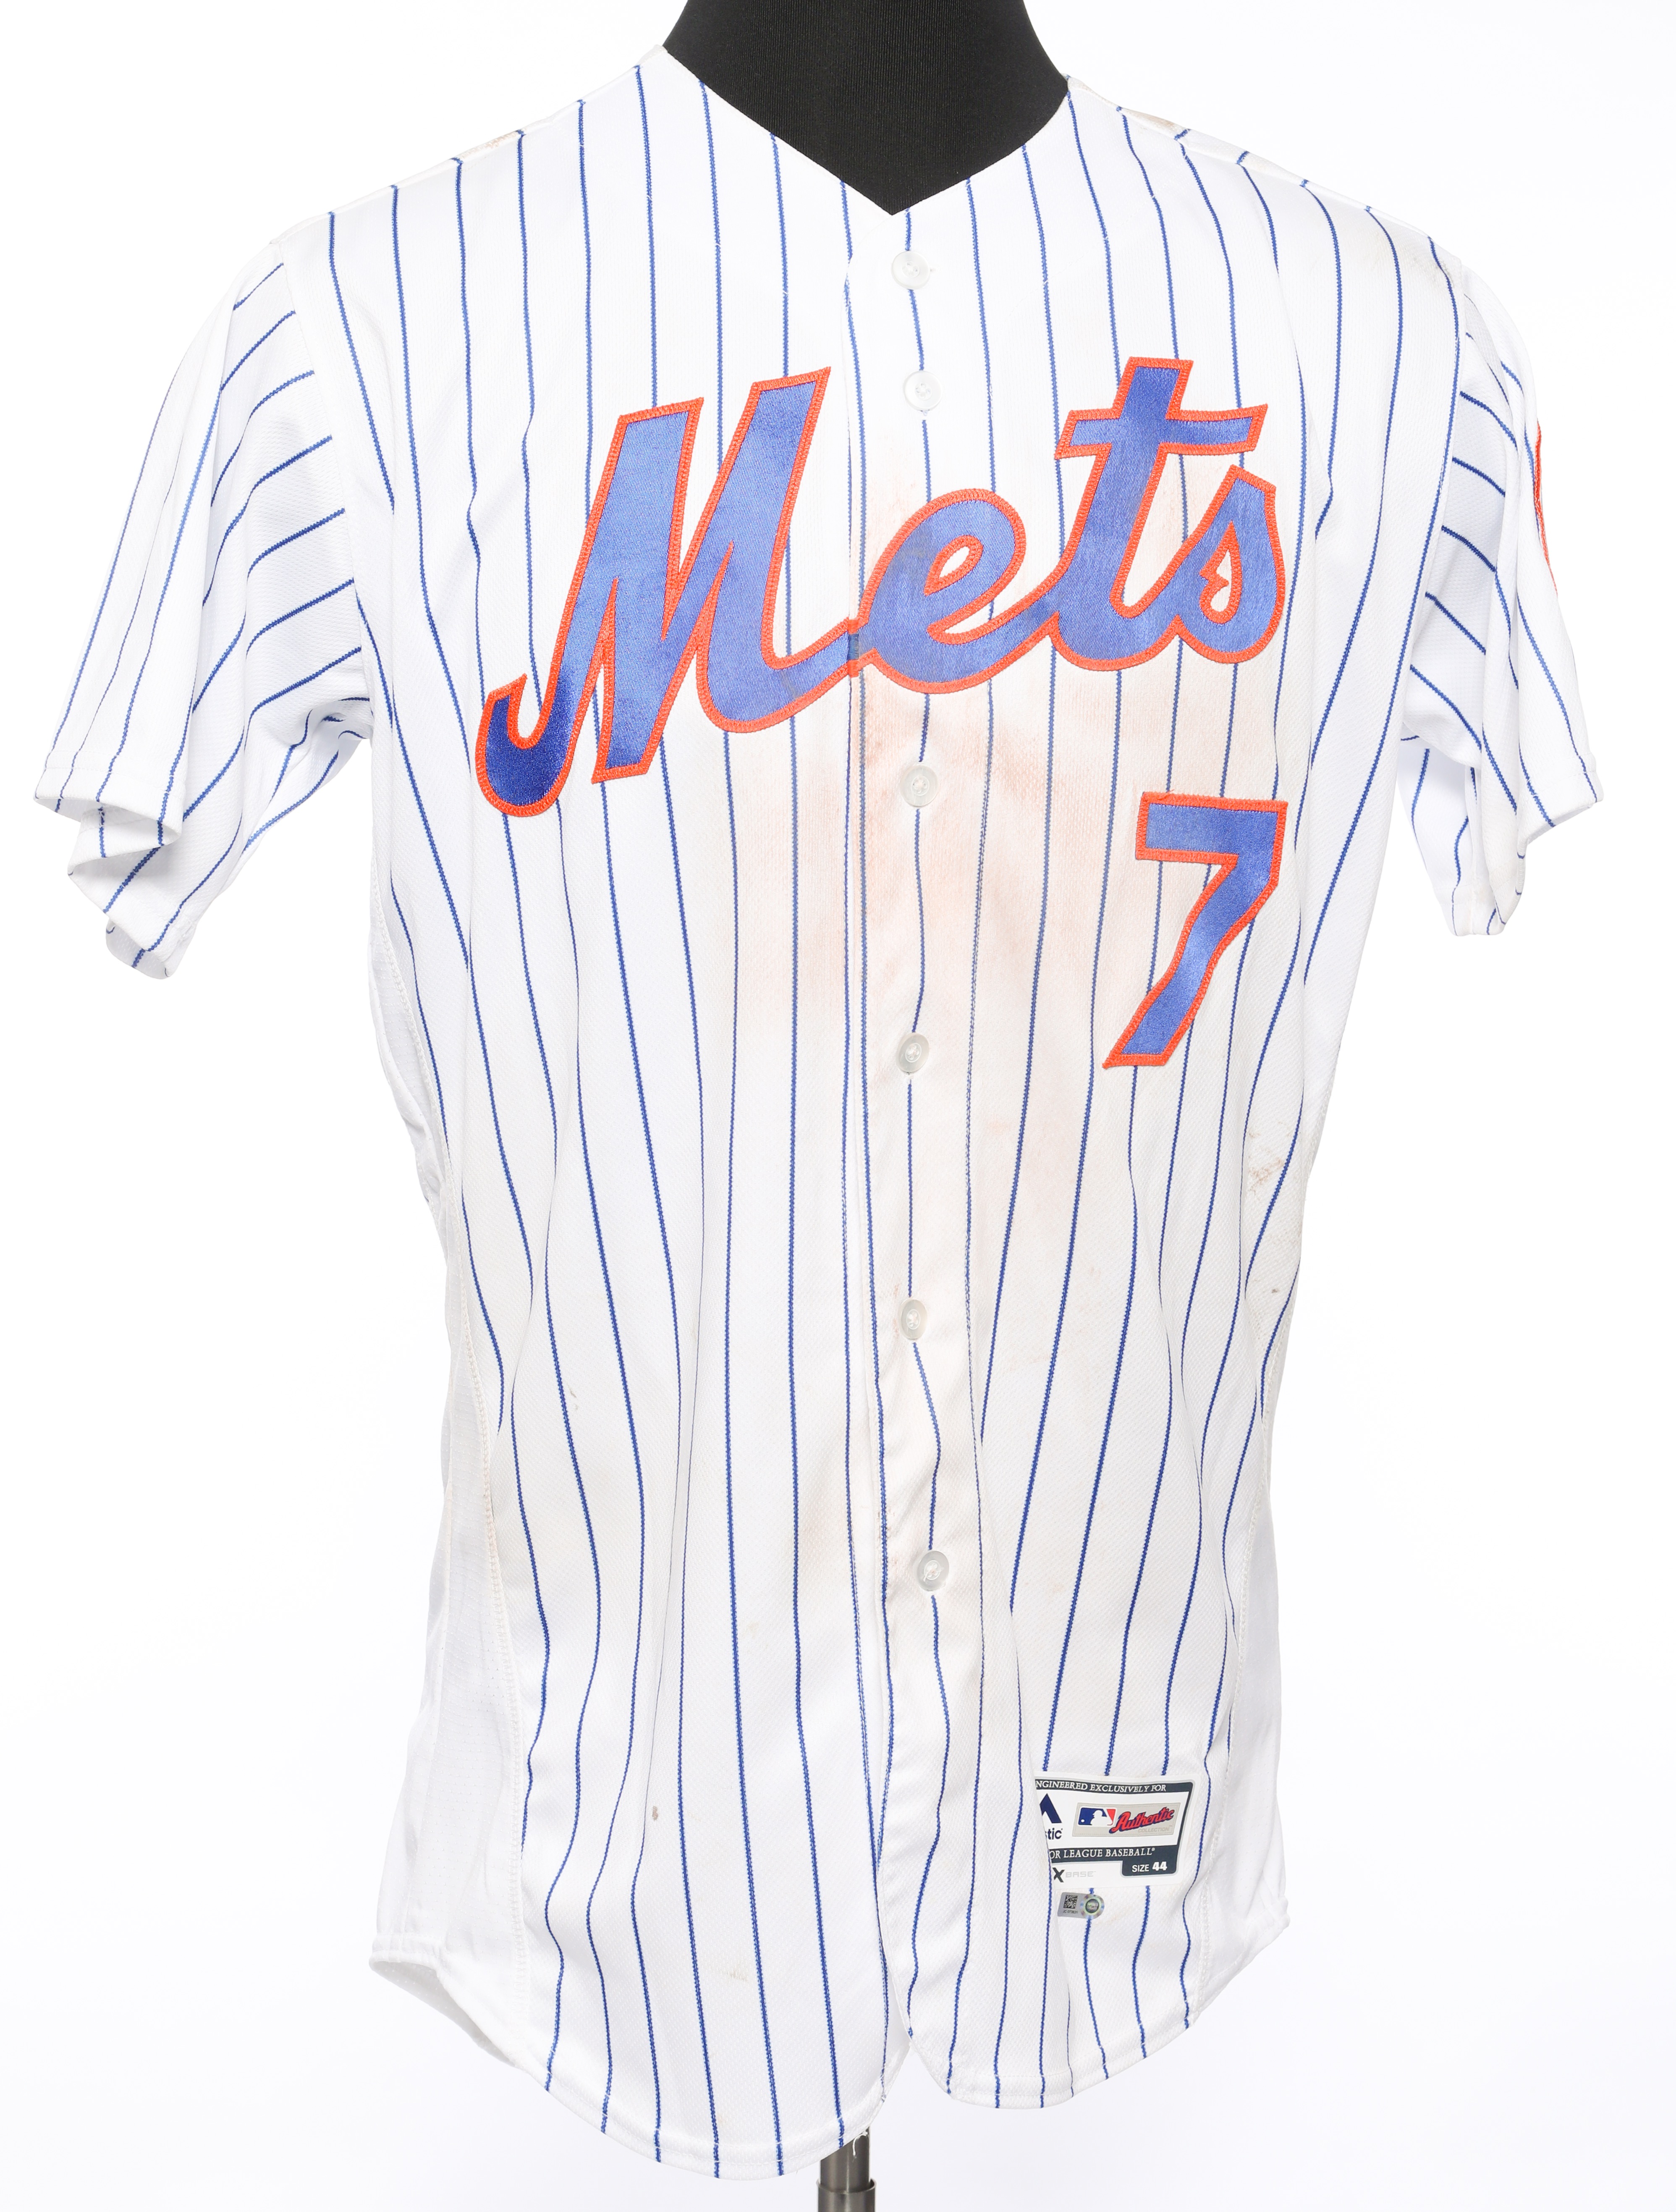 Jose Reyes Game-Worn Jersey From 2000th Hit - Mets History